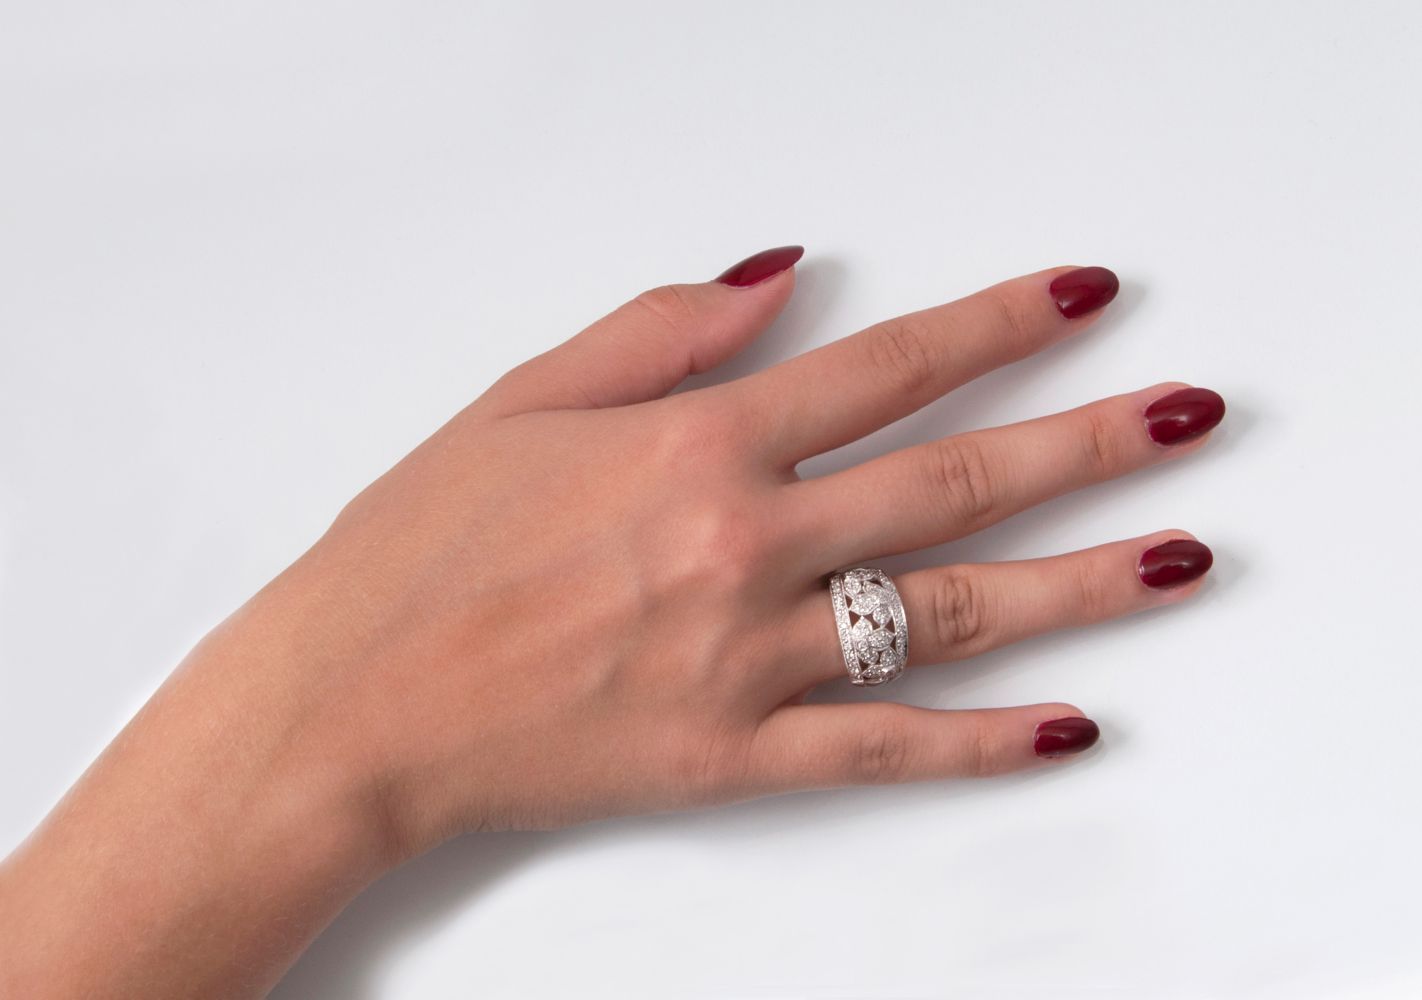 A Diamond Ring with Flowers - image 2